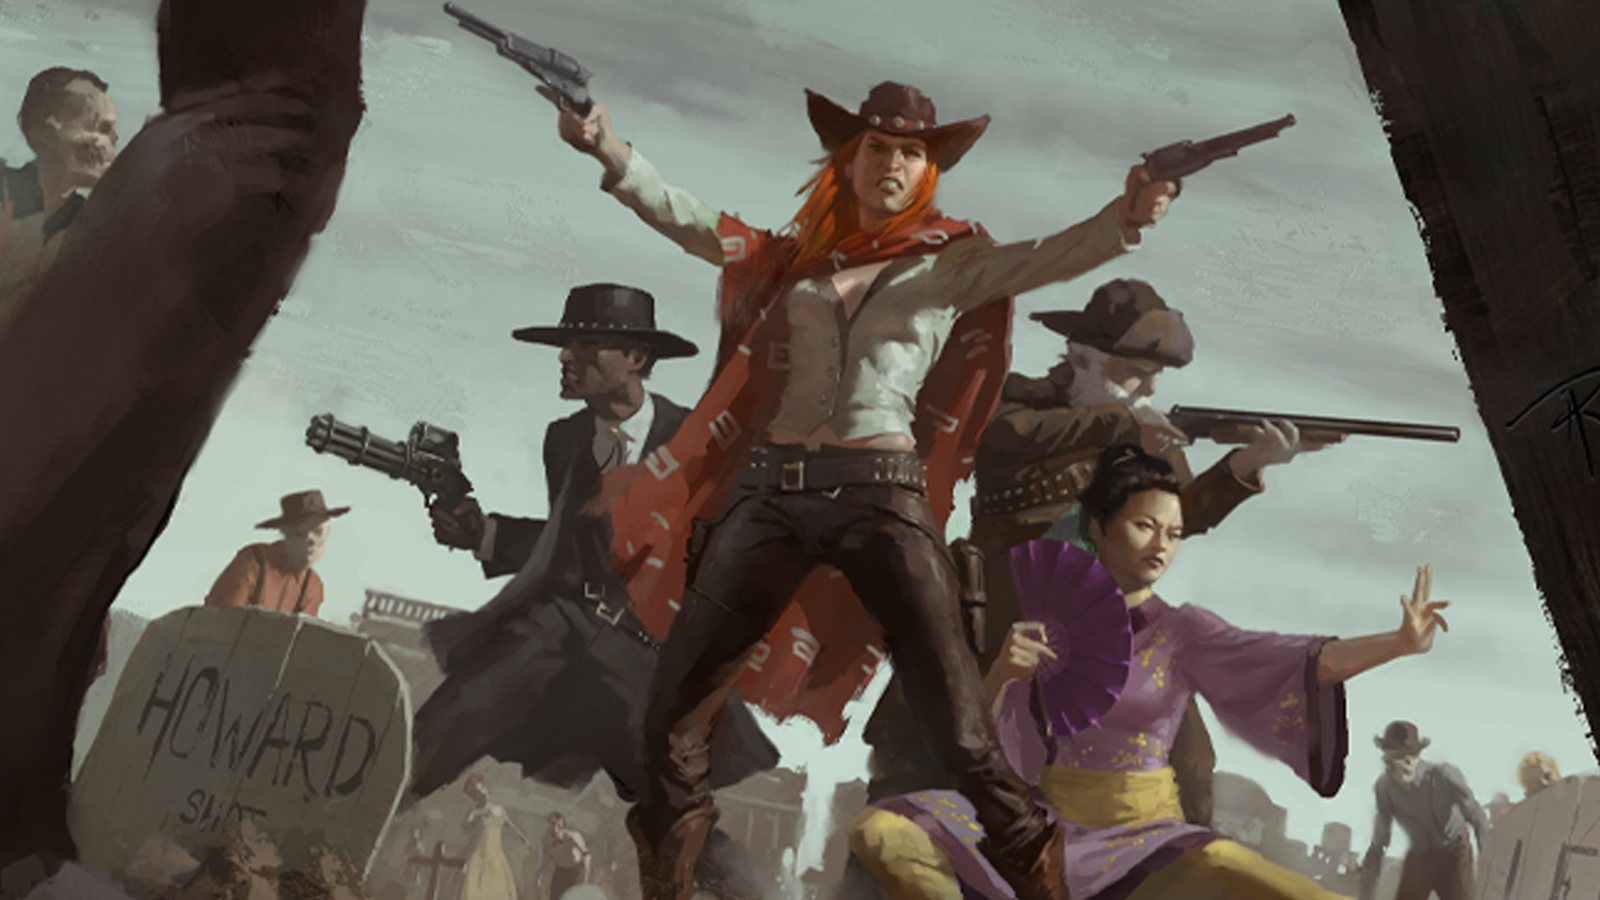 Brutal Evil West footage has released, giving us a look at co-op